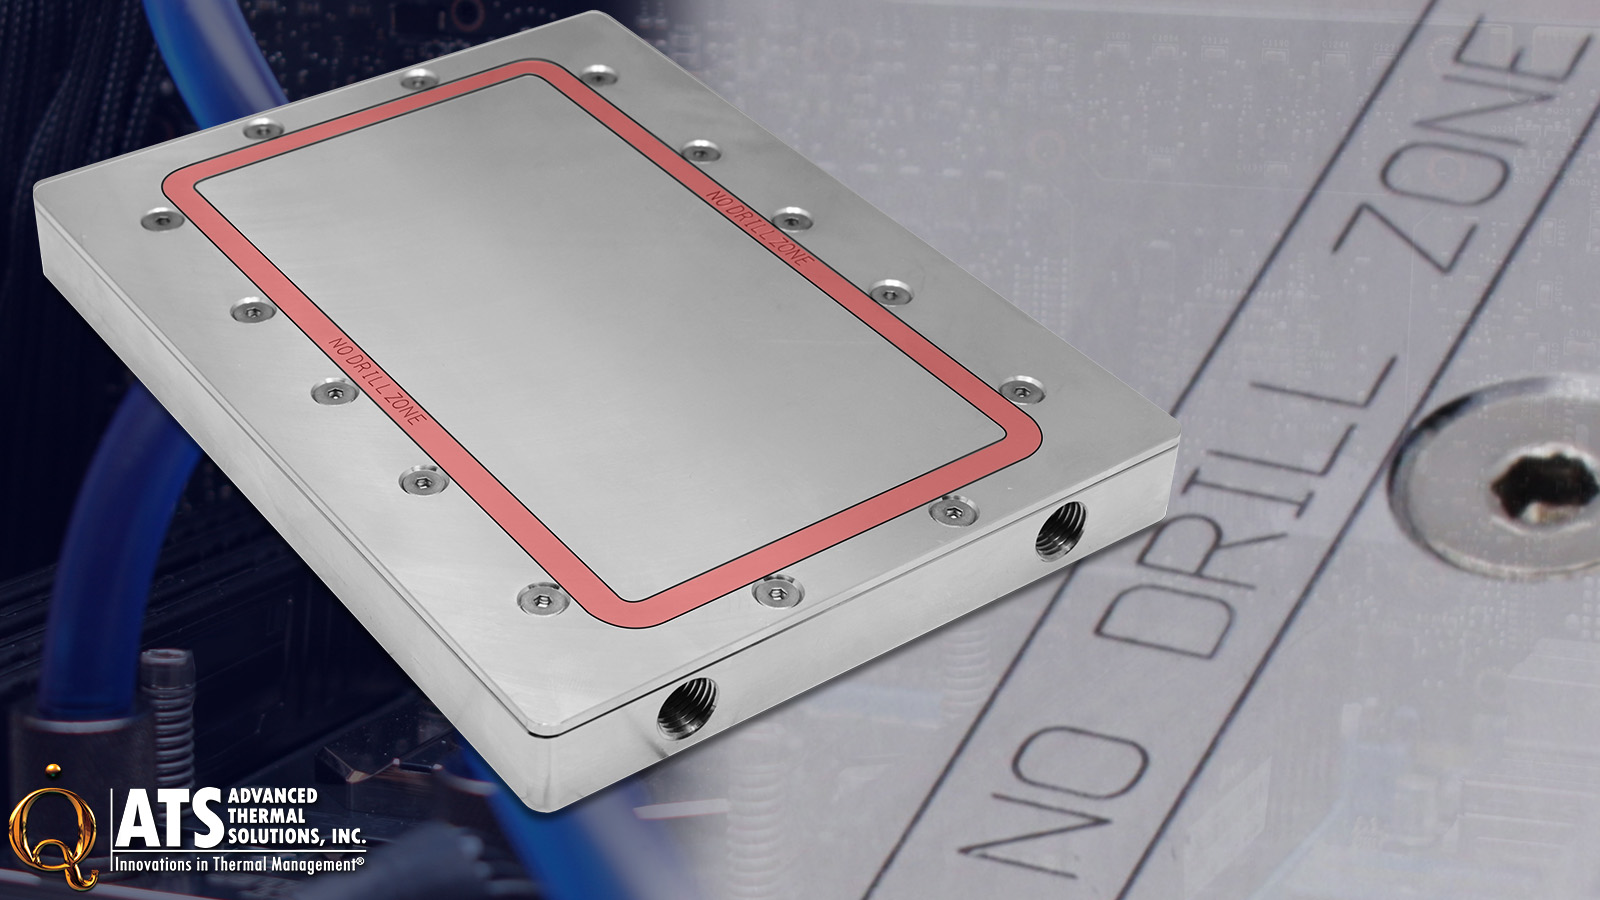 DIY Cold Plates Can be Customized for Precise Attachment to Hot Electronic Devices